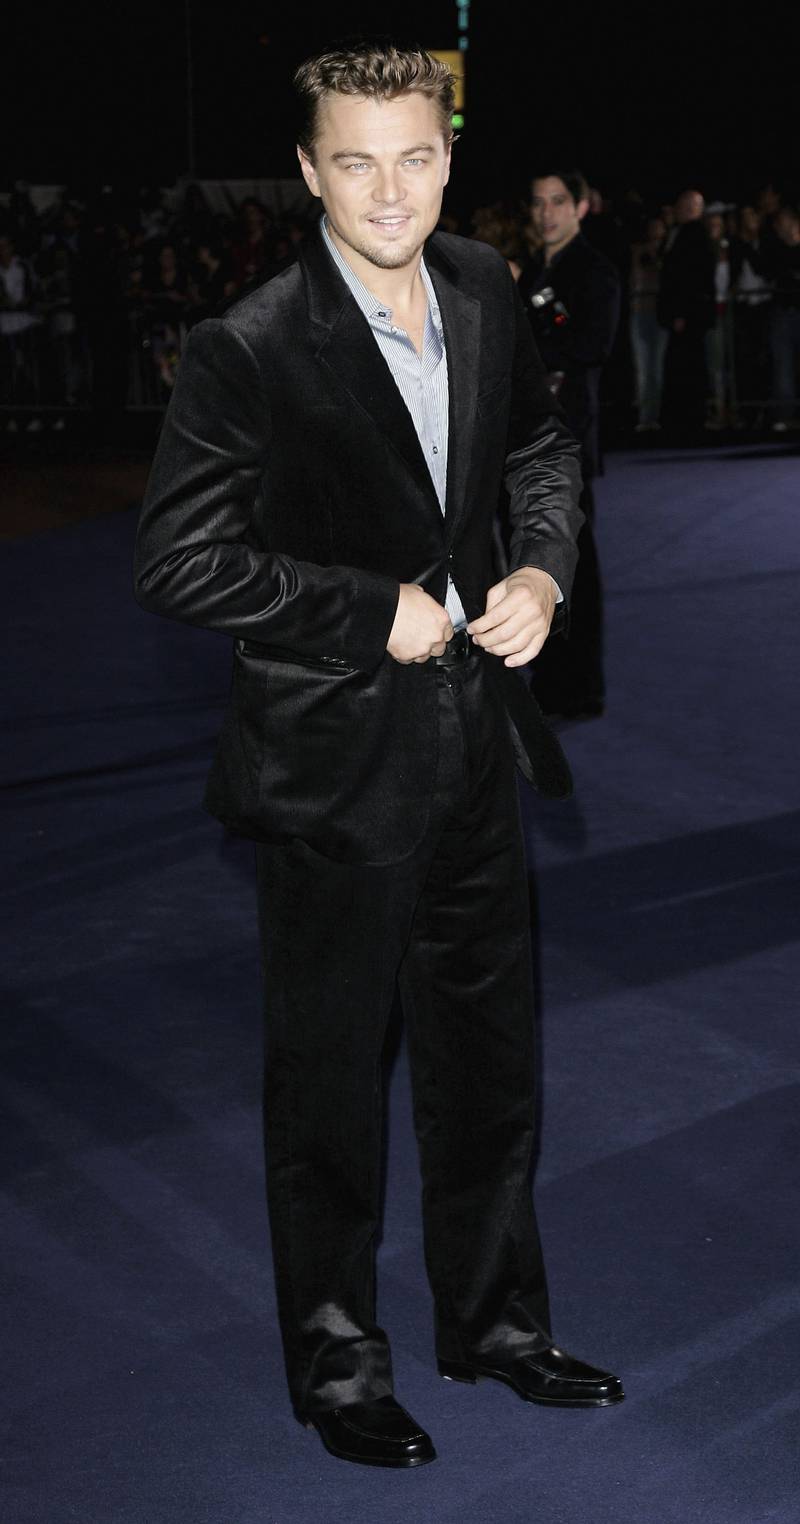 LONDON - SEPTEMBER 21:  Leonardo Di Caprio arrives at the Emporio Armani One Night Only Fashion show at Earls Court as part of London Fashion Week Spring/Summer 2007 on September 21, 2006 in London, England.  (Photo by Gareth Cattermole/Getty Images)